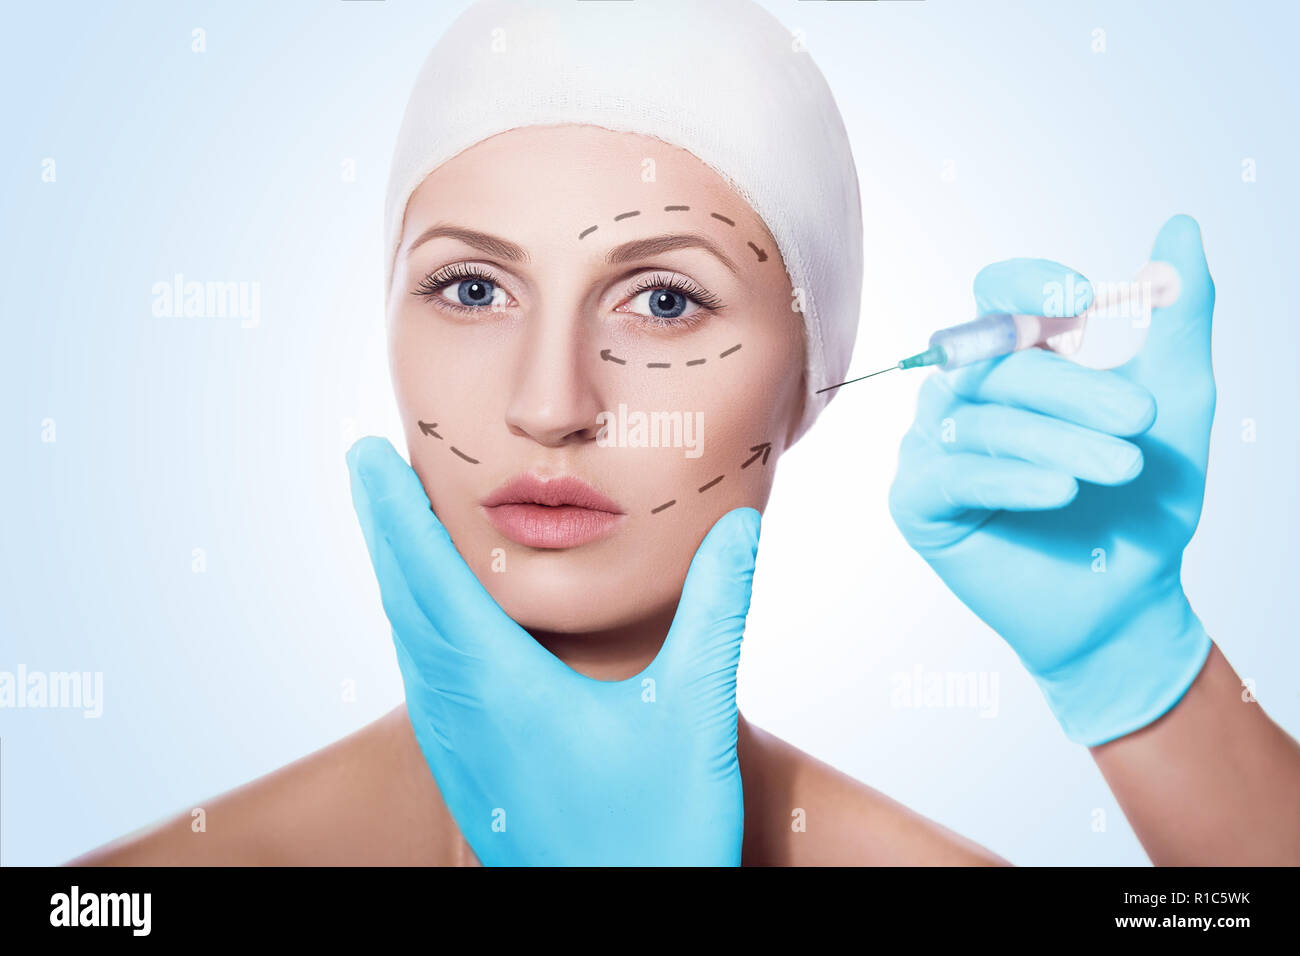 beautiful woman with arrows on face having facial injections Stock Photo